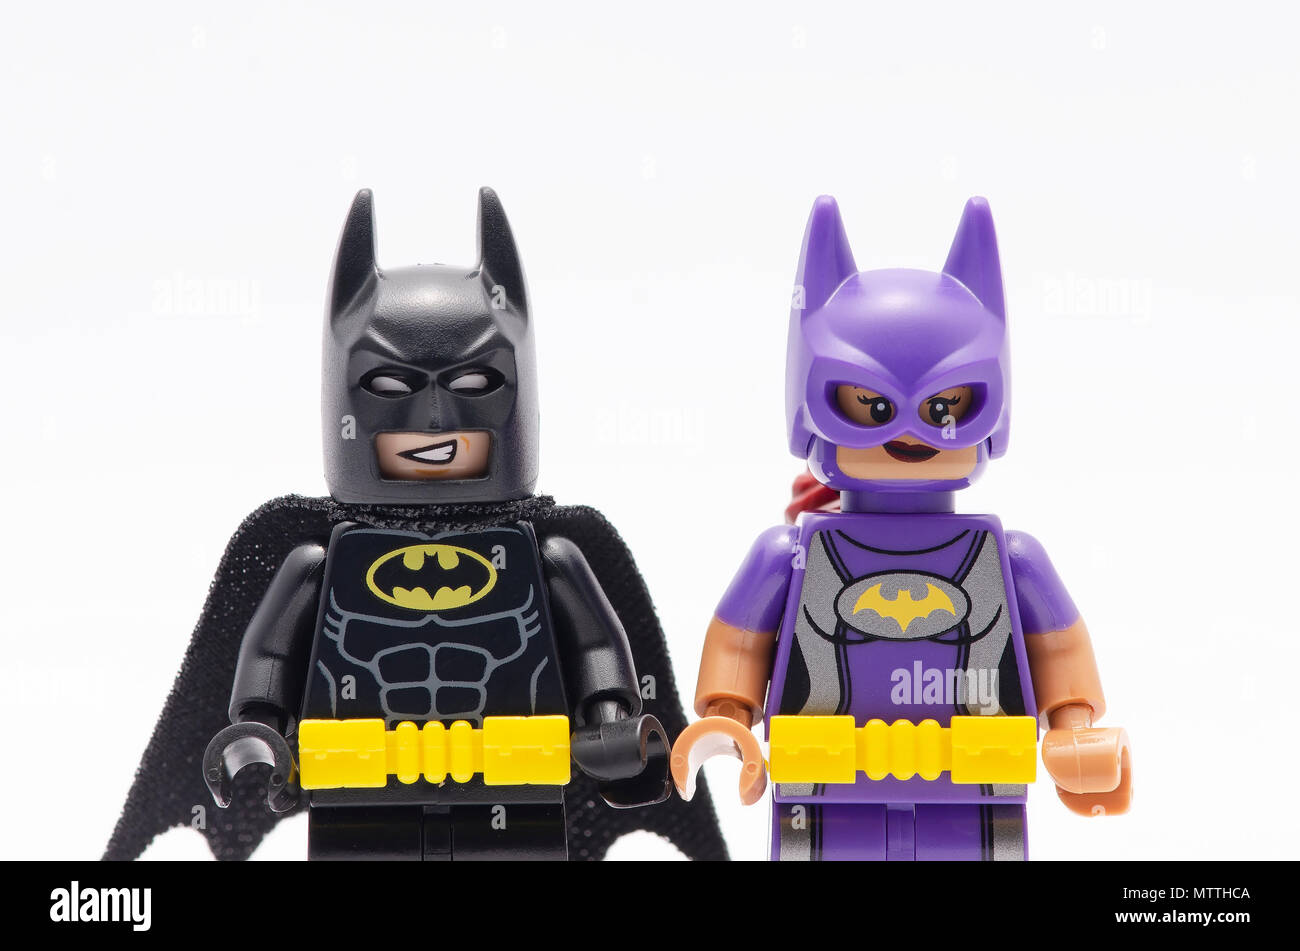 lego of various batman minifigures. Lego minifigures are manufactured by  The Lego Group Stock Photo - Alamy